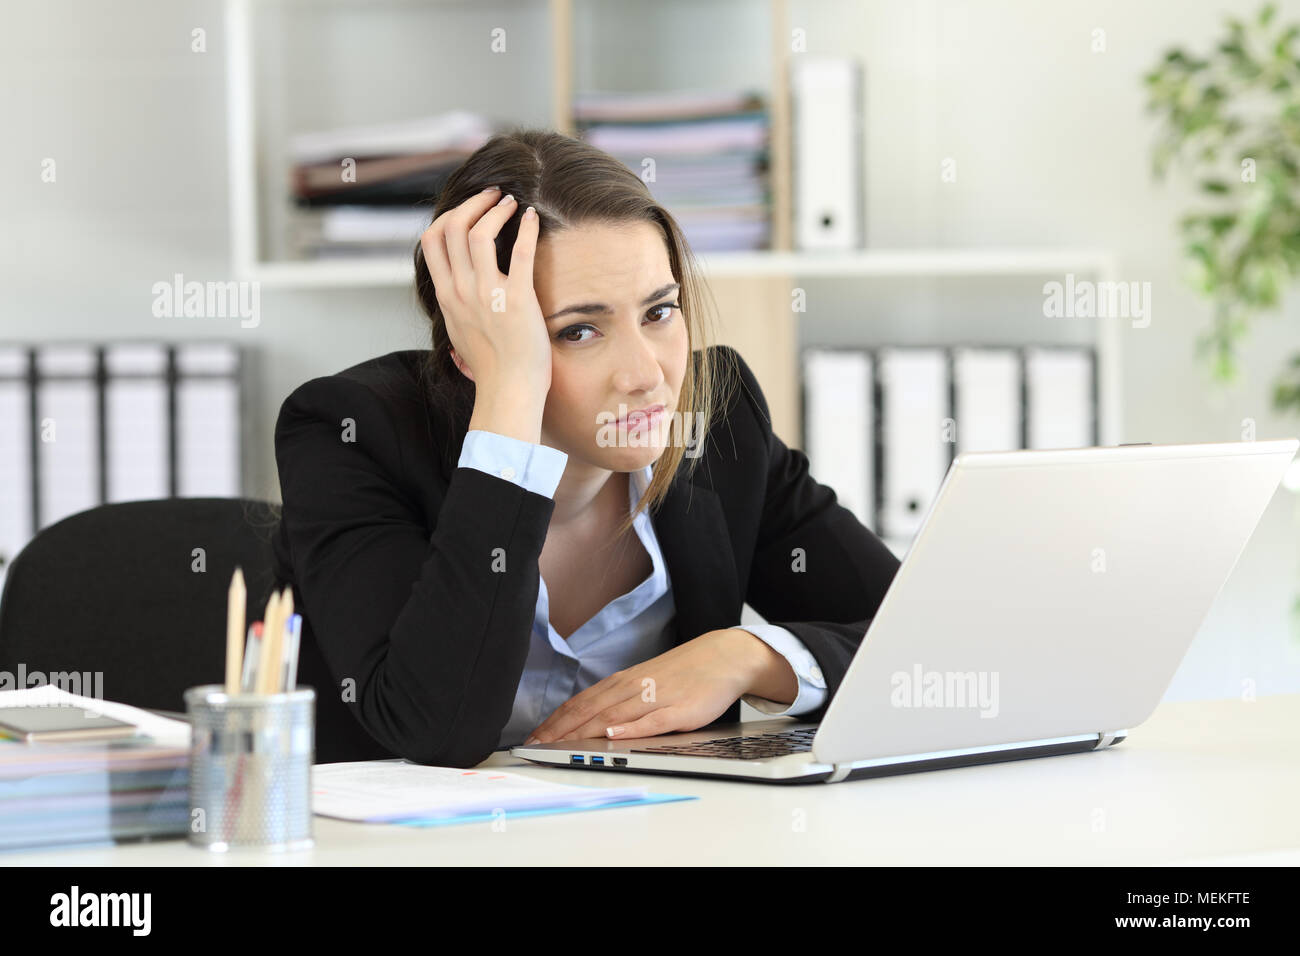 Worried office worker looking at camera sitting in a desk at workplace Stock Photo